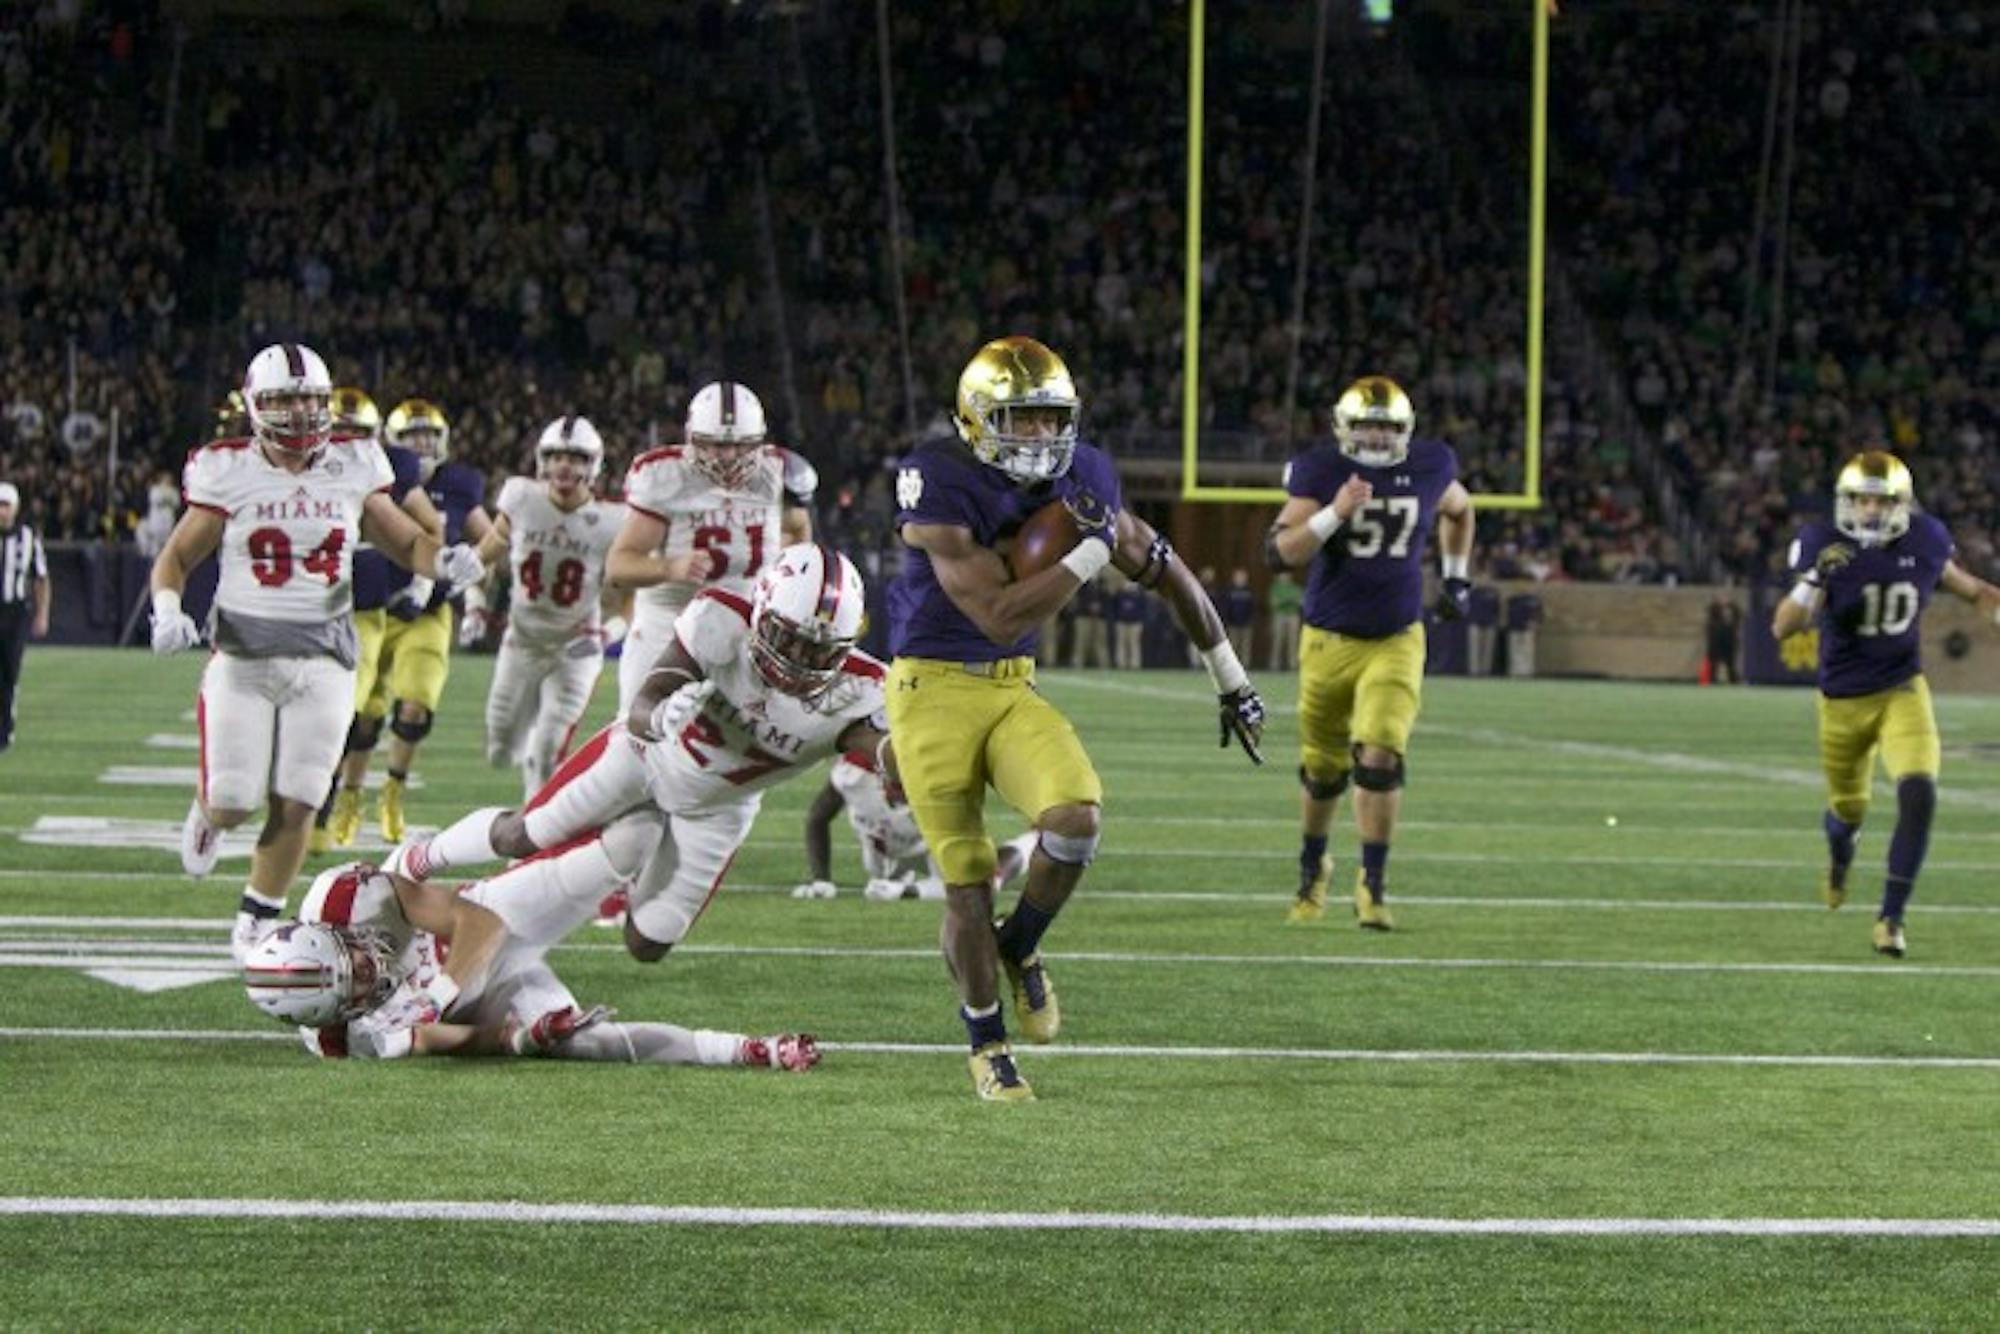 Irish sophomore running back Deon McIntosh slips past a defender during a 26-yard touchdown run in Notre Dame's 52-17 win over Miami (OH) on Saturday.